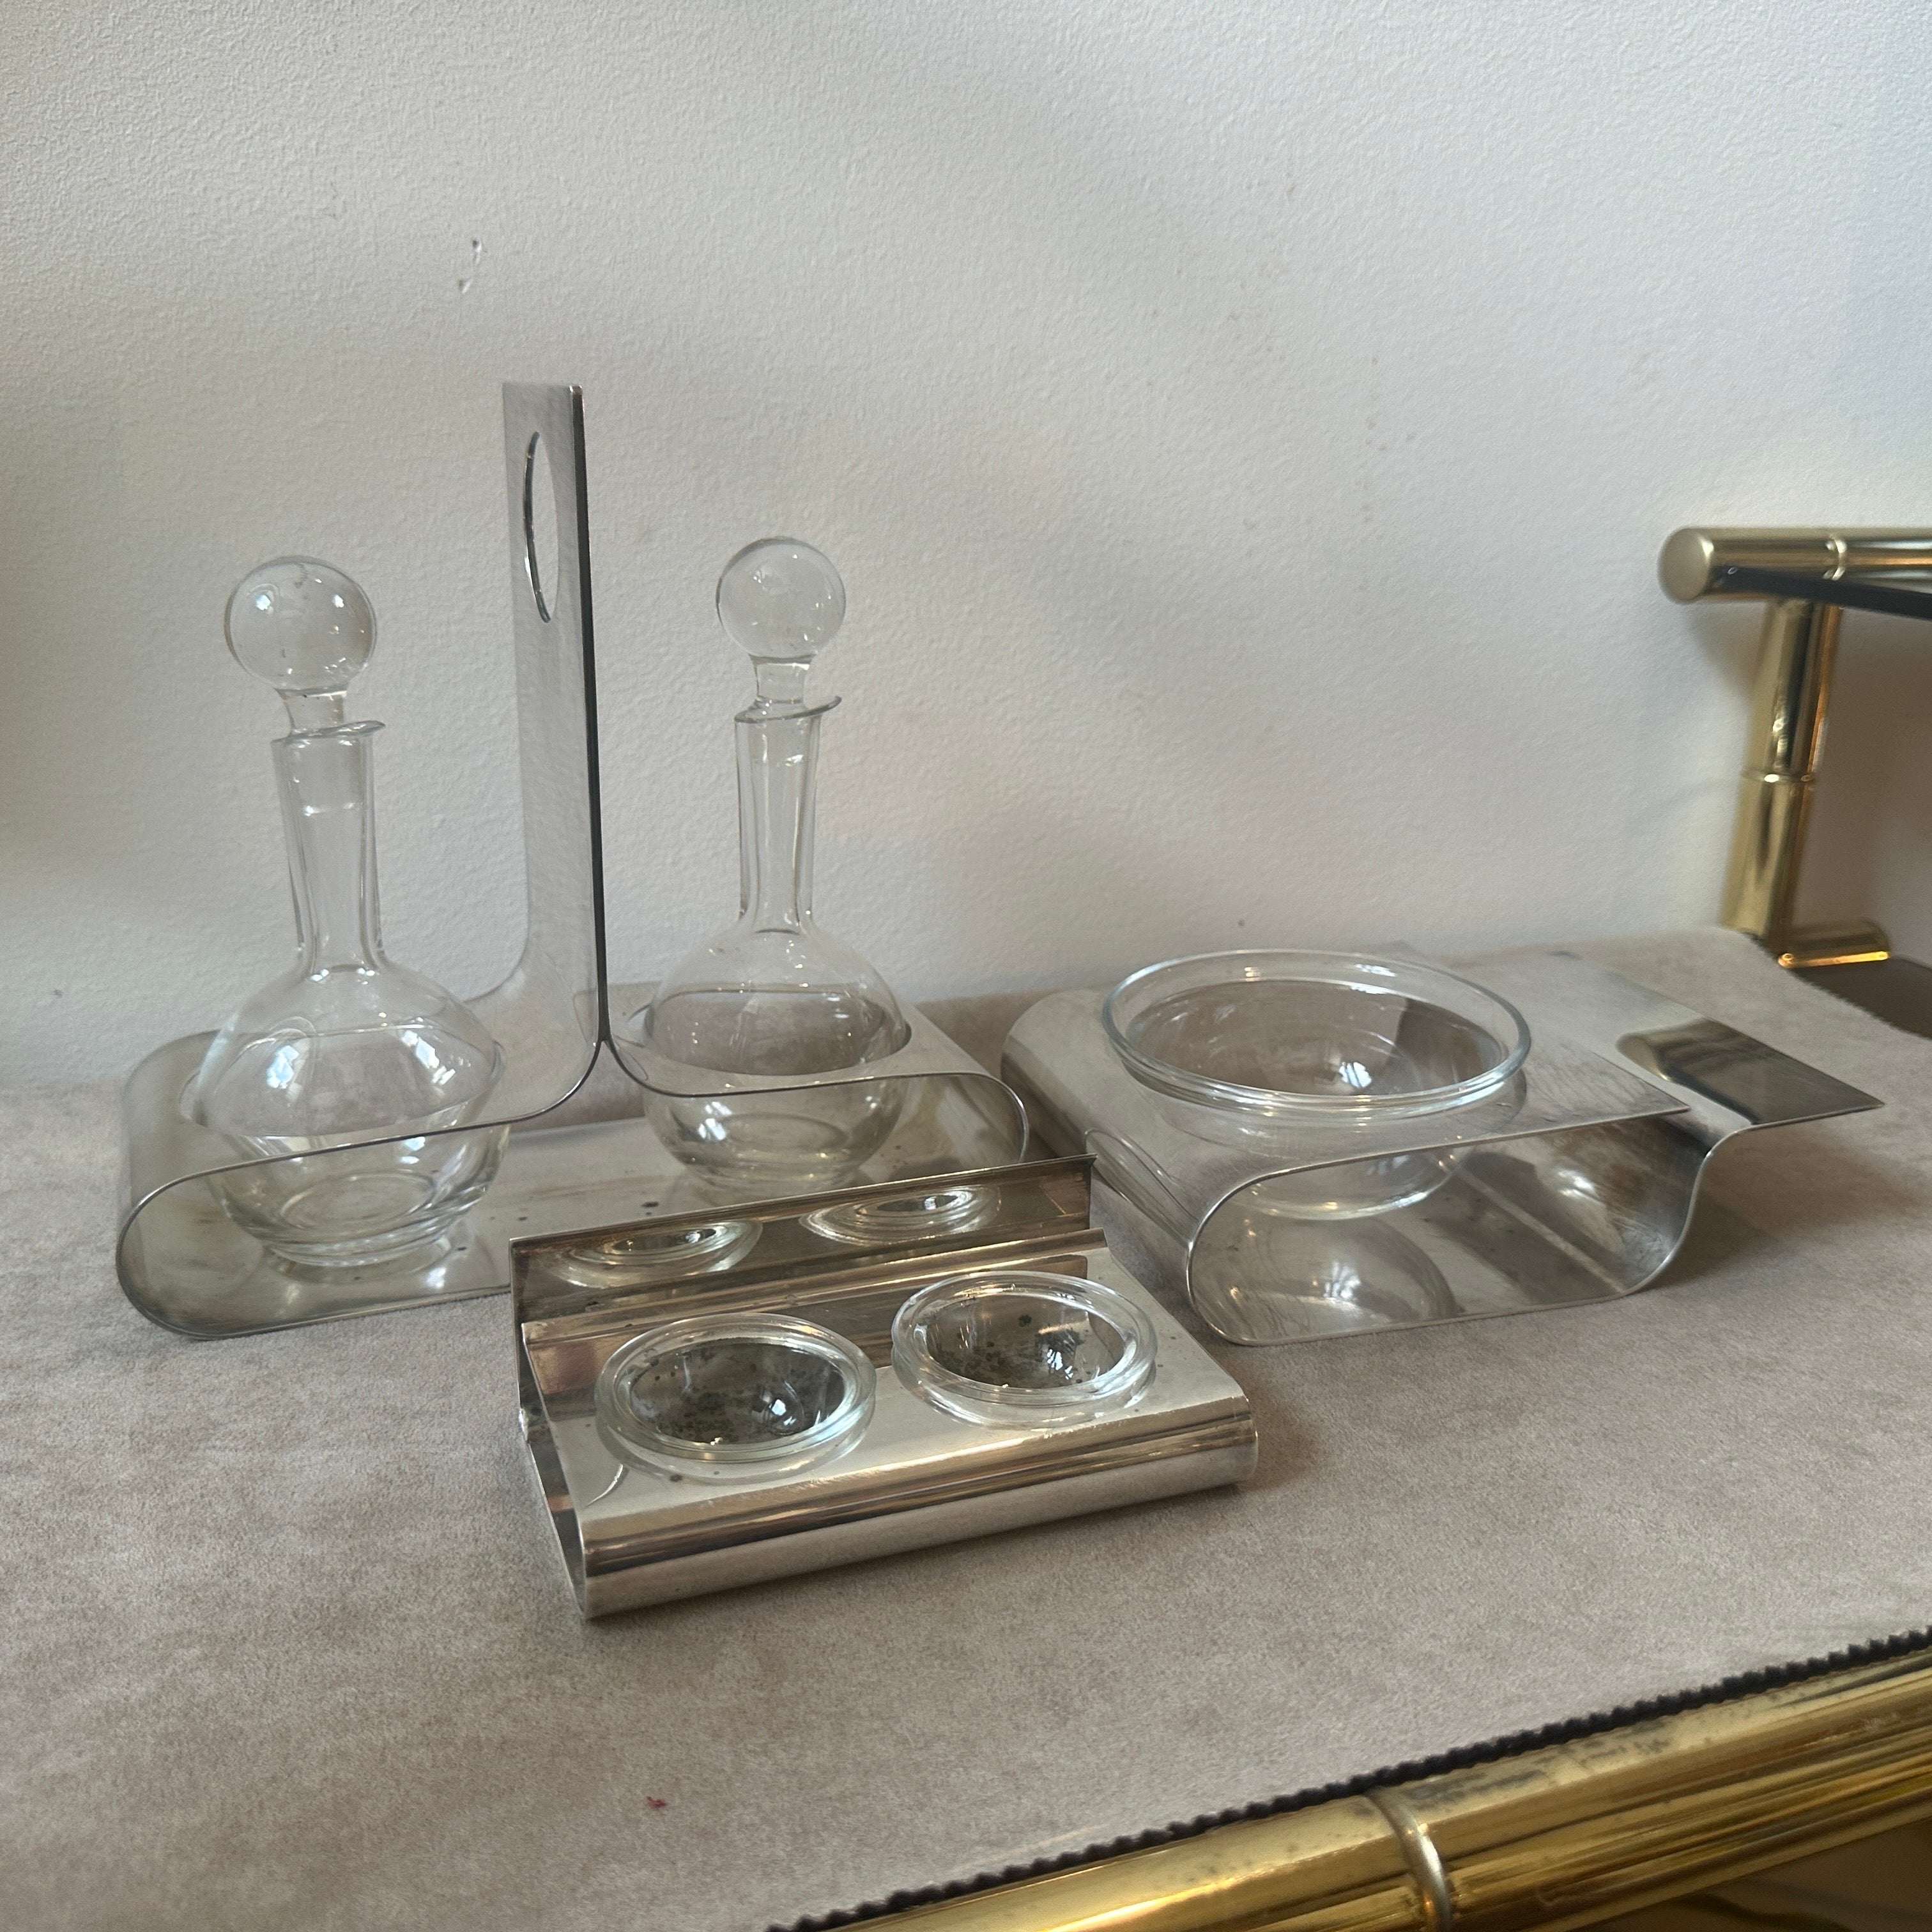 
This silver-plated set designed by Lino Sabattini is composed of a cruet for oil and vinegar with crystal glass ampoules, one cheese bowl, and a salt and pepper shaker. The dimensions of the other two pieces are 17x12 cm and 12x8 cm, respectively.